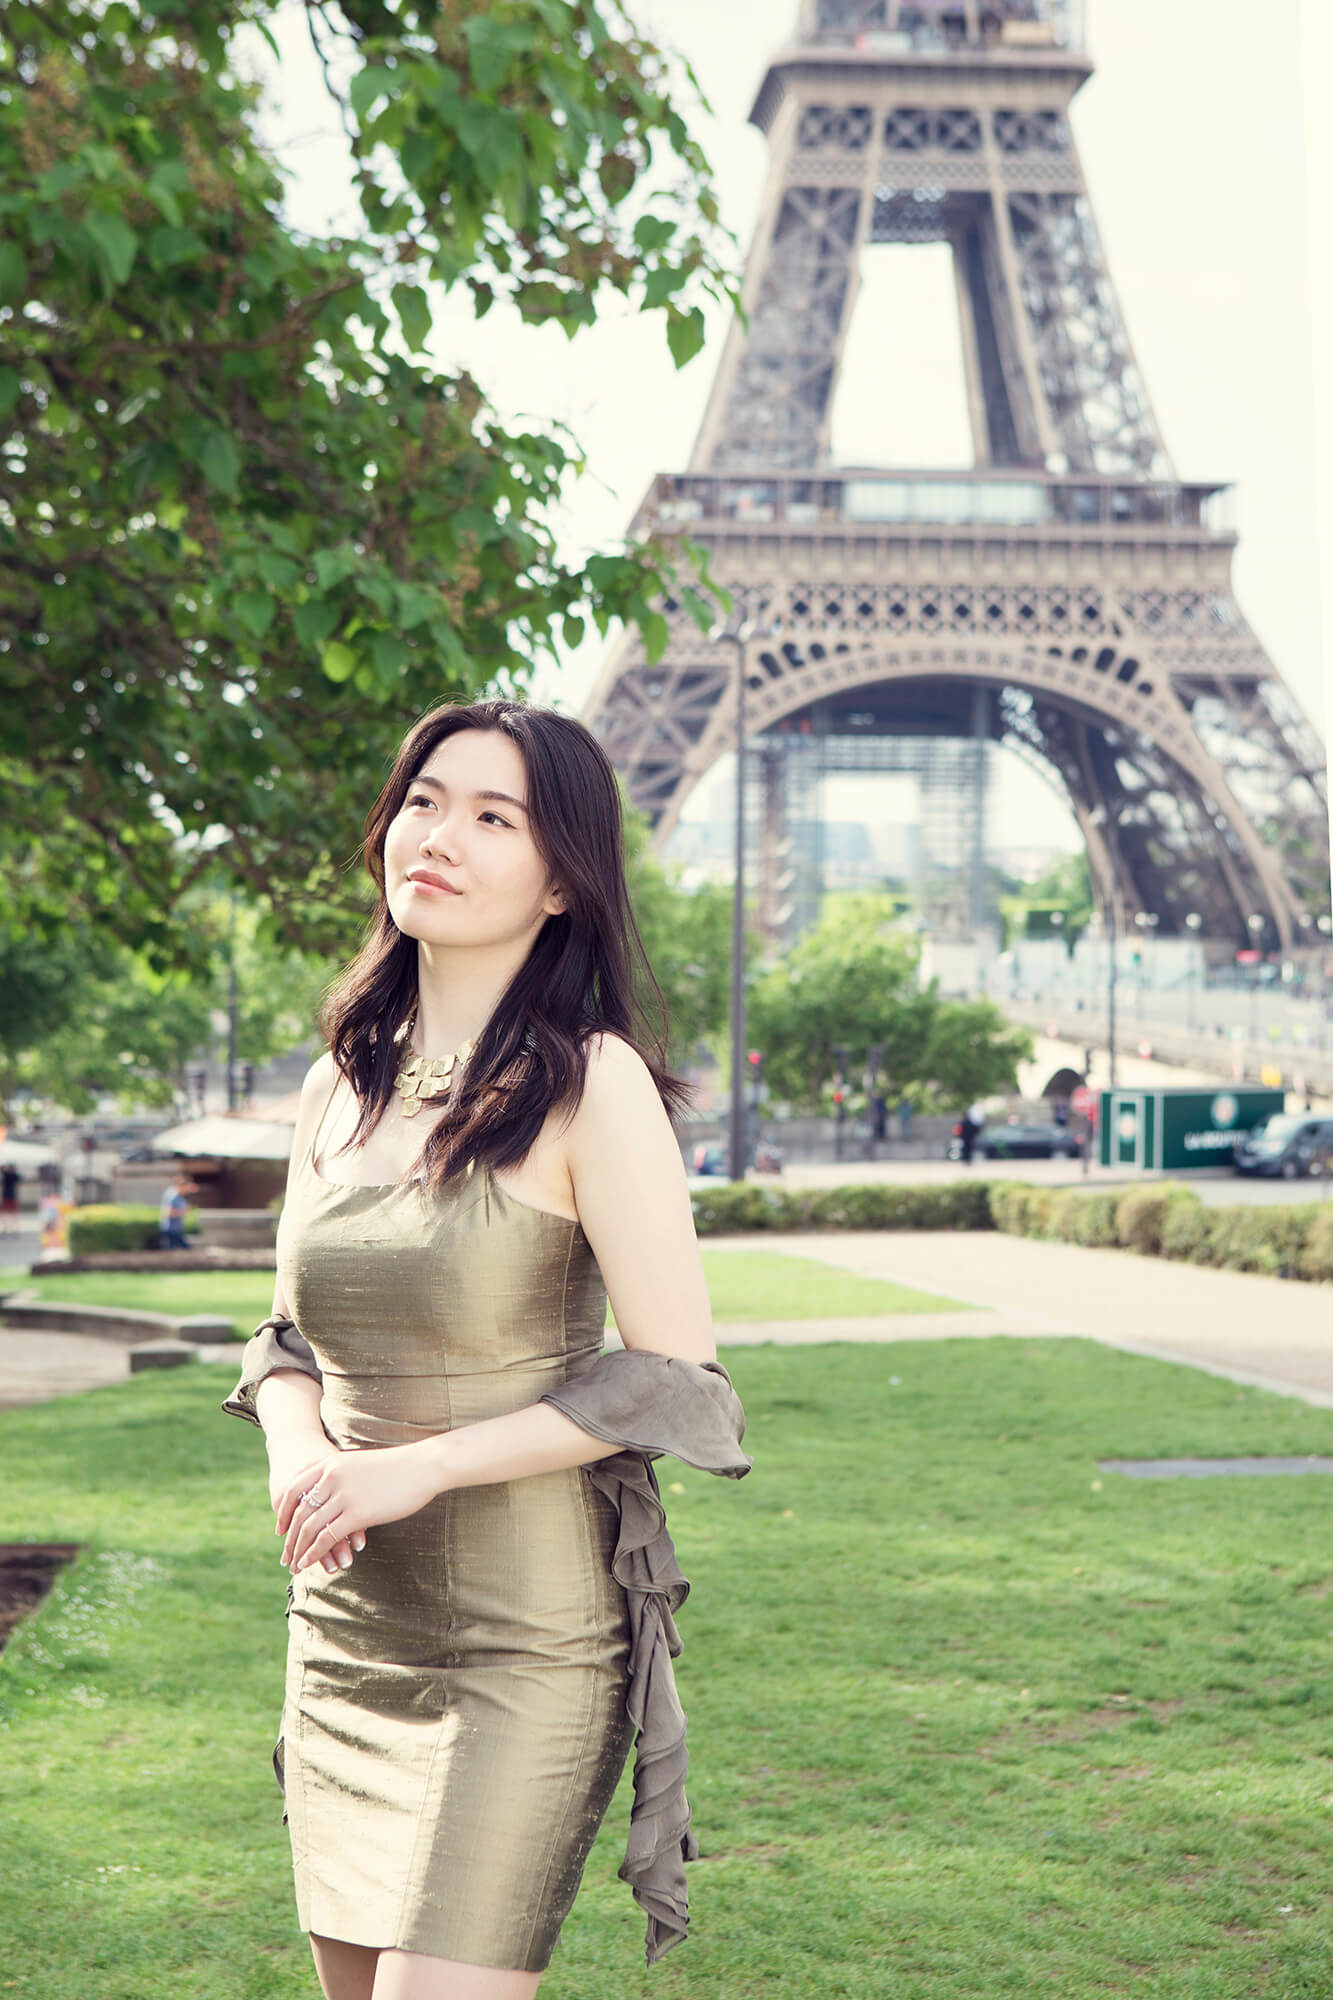 photo shoot in front of the Eiffel Tower